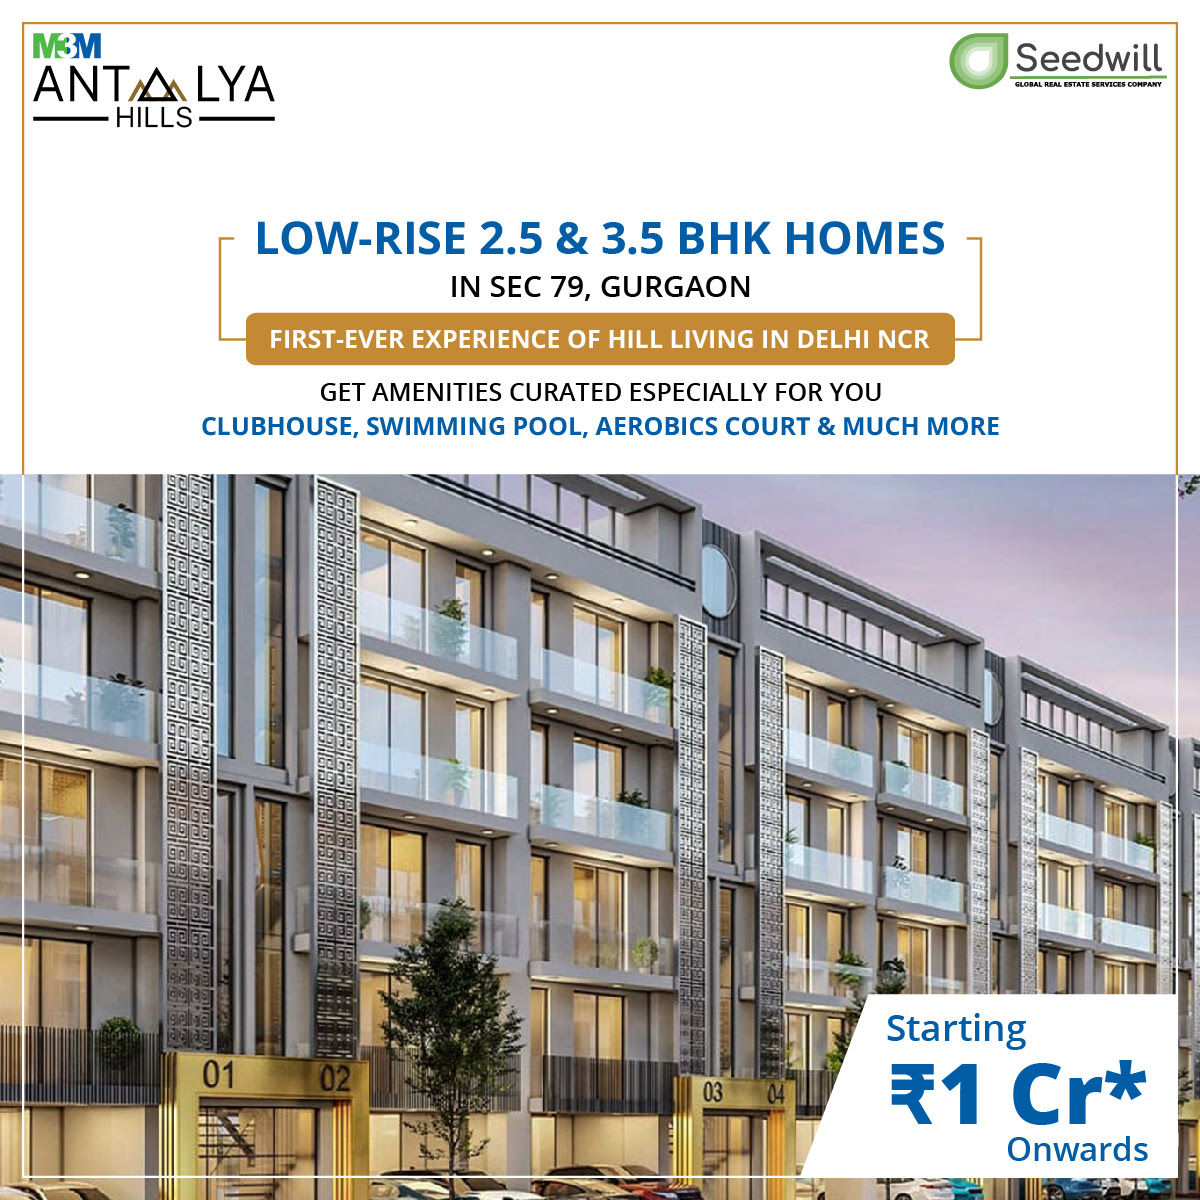 Low rise 2.5 and 3.5 BHK Home Rs 1 Cr at M3M Antalya Hills, Gurgaon Update